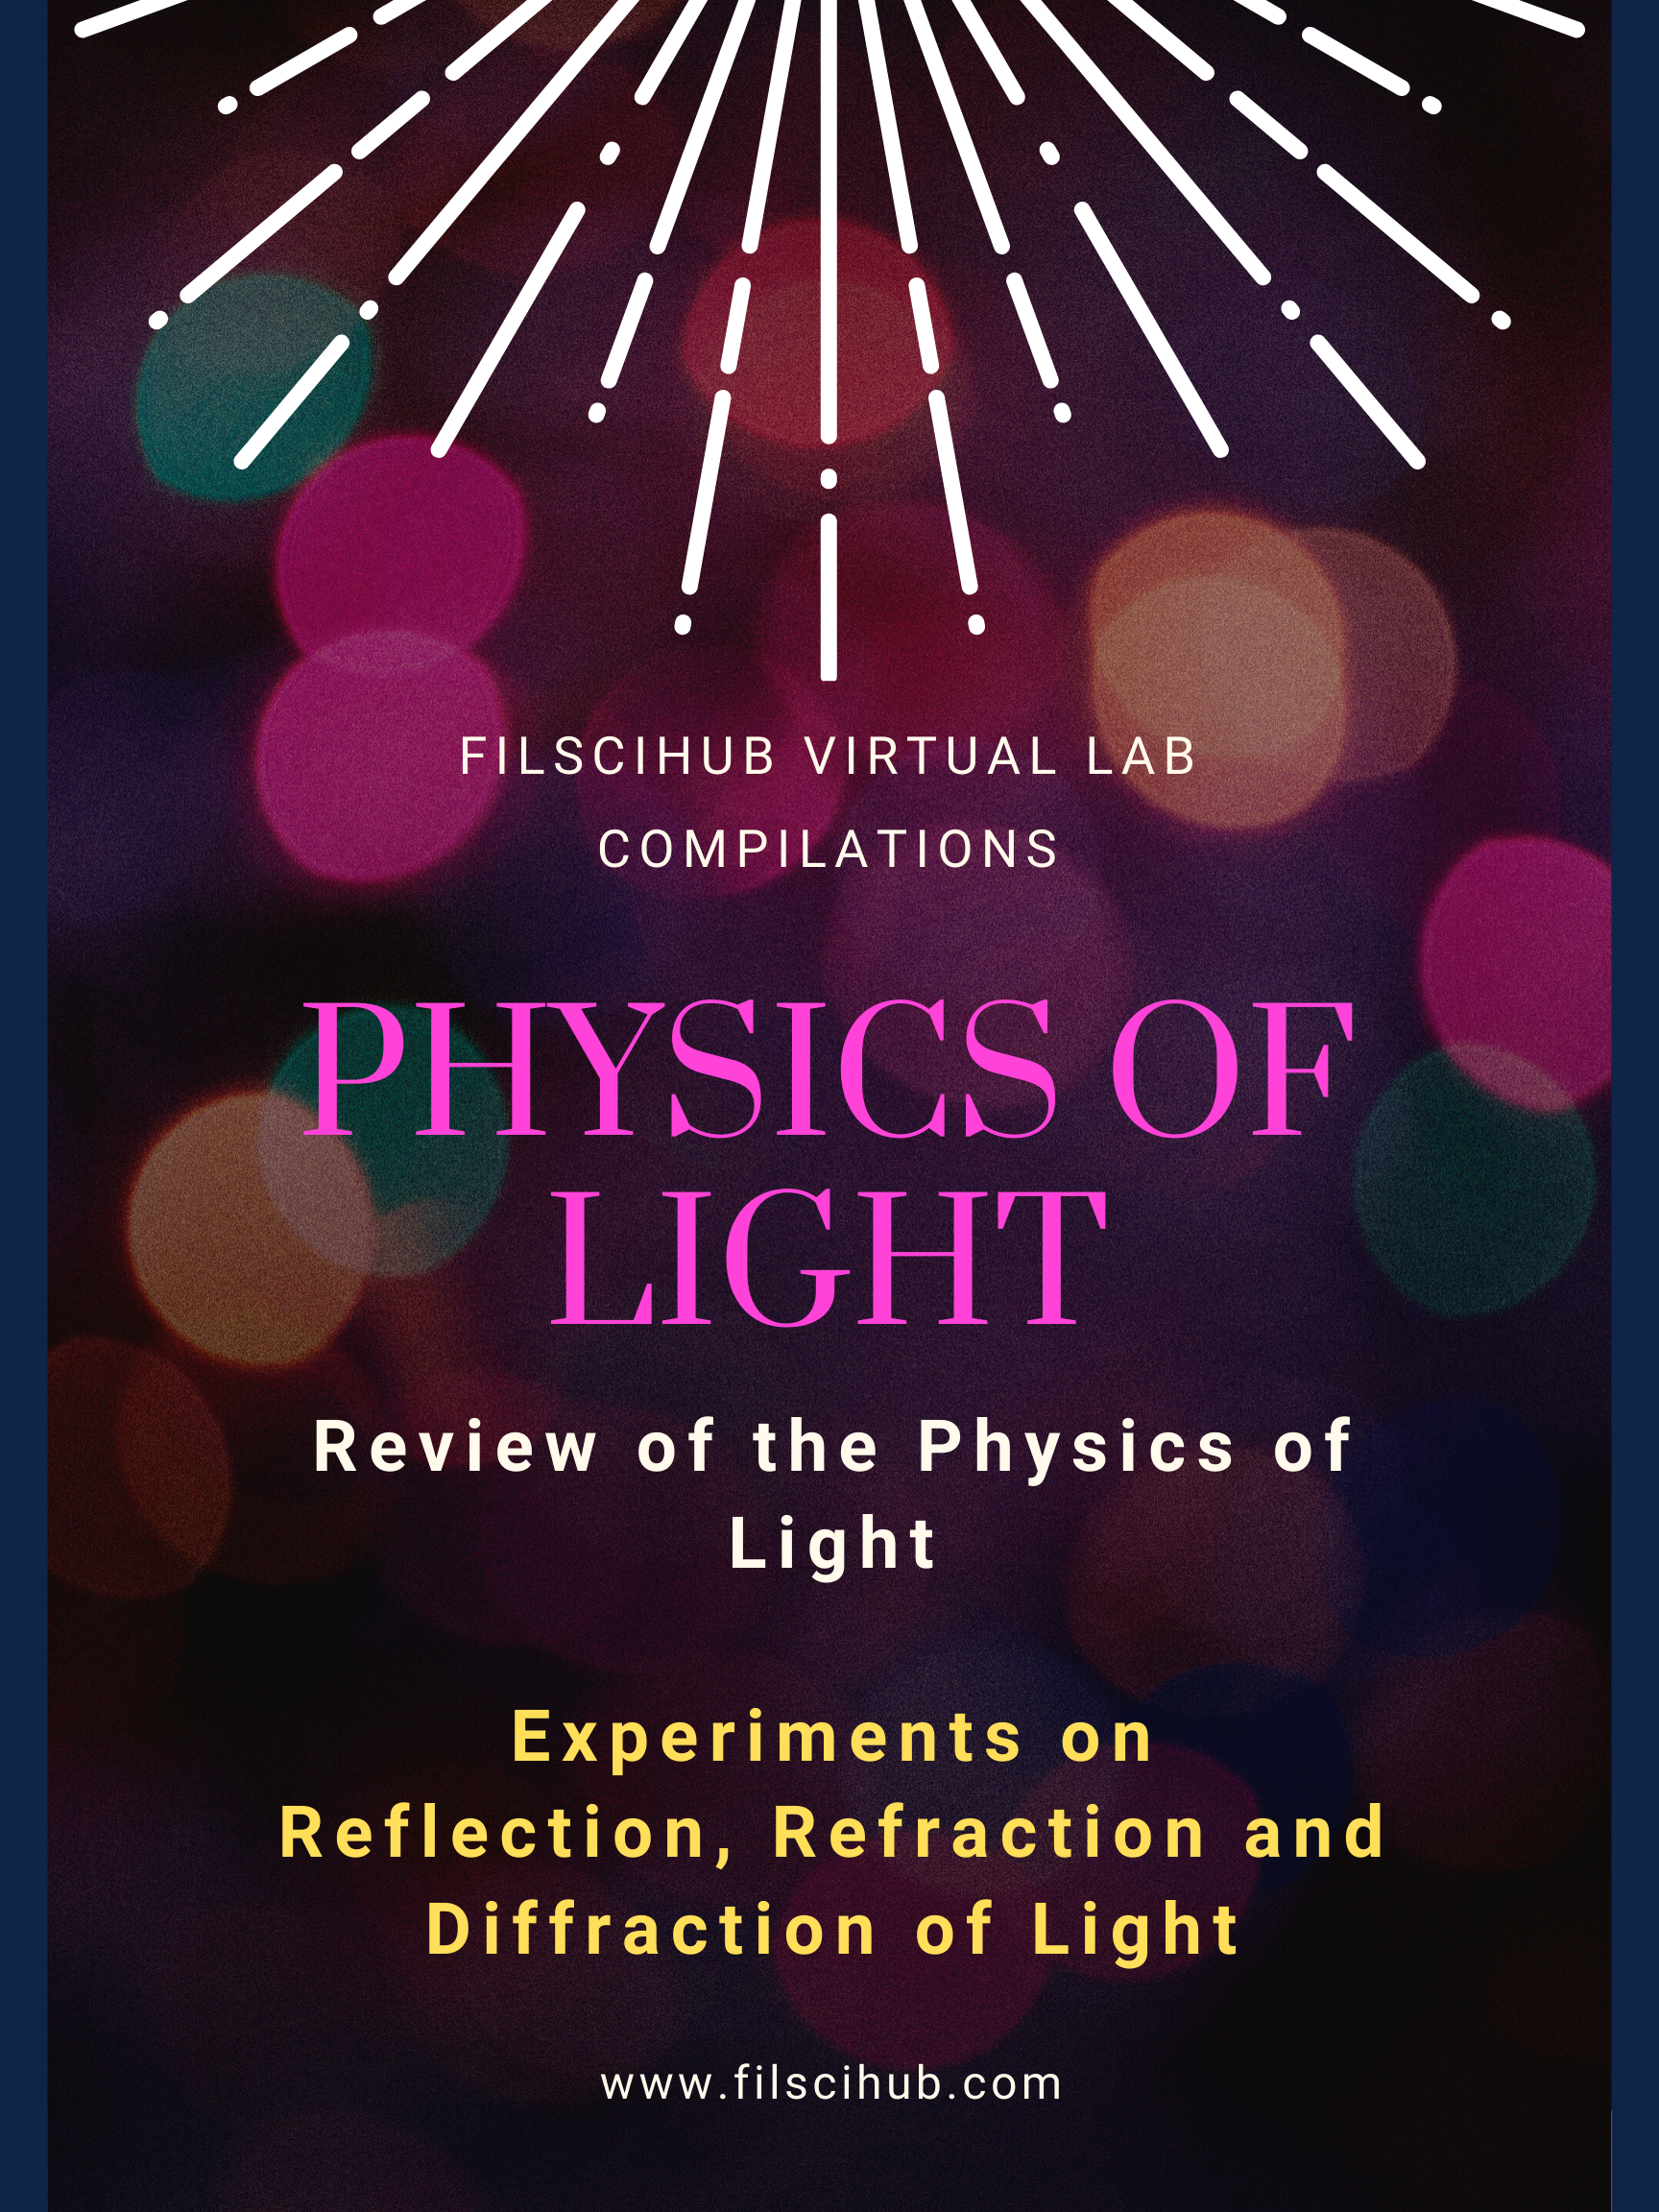 Introduction to Light, Physics